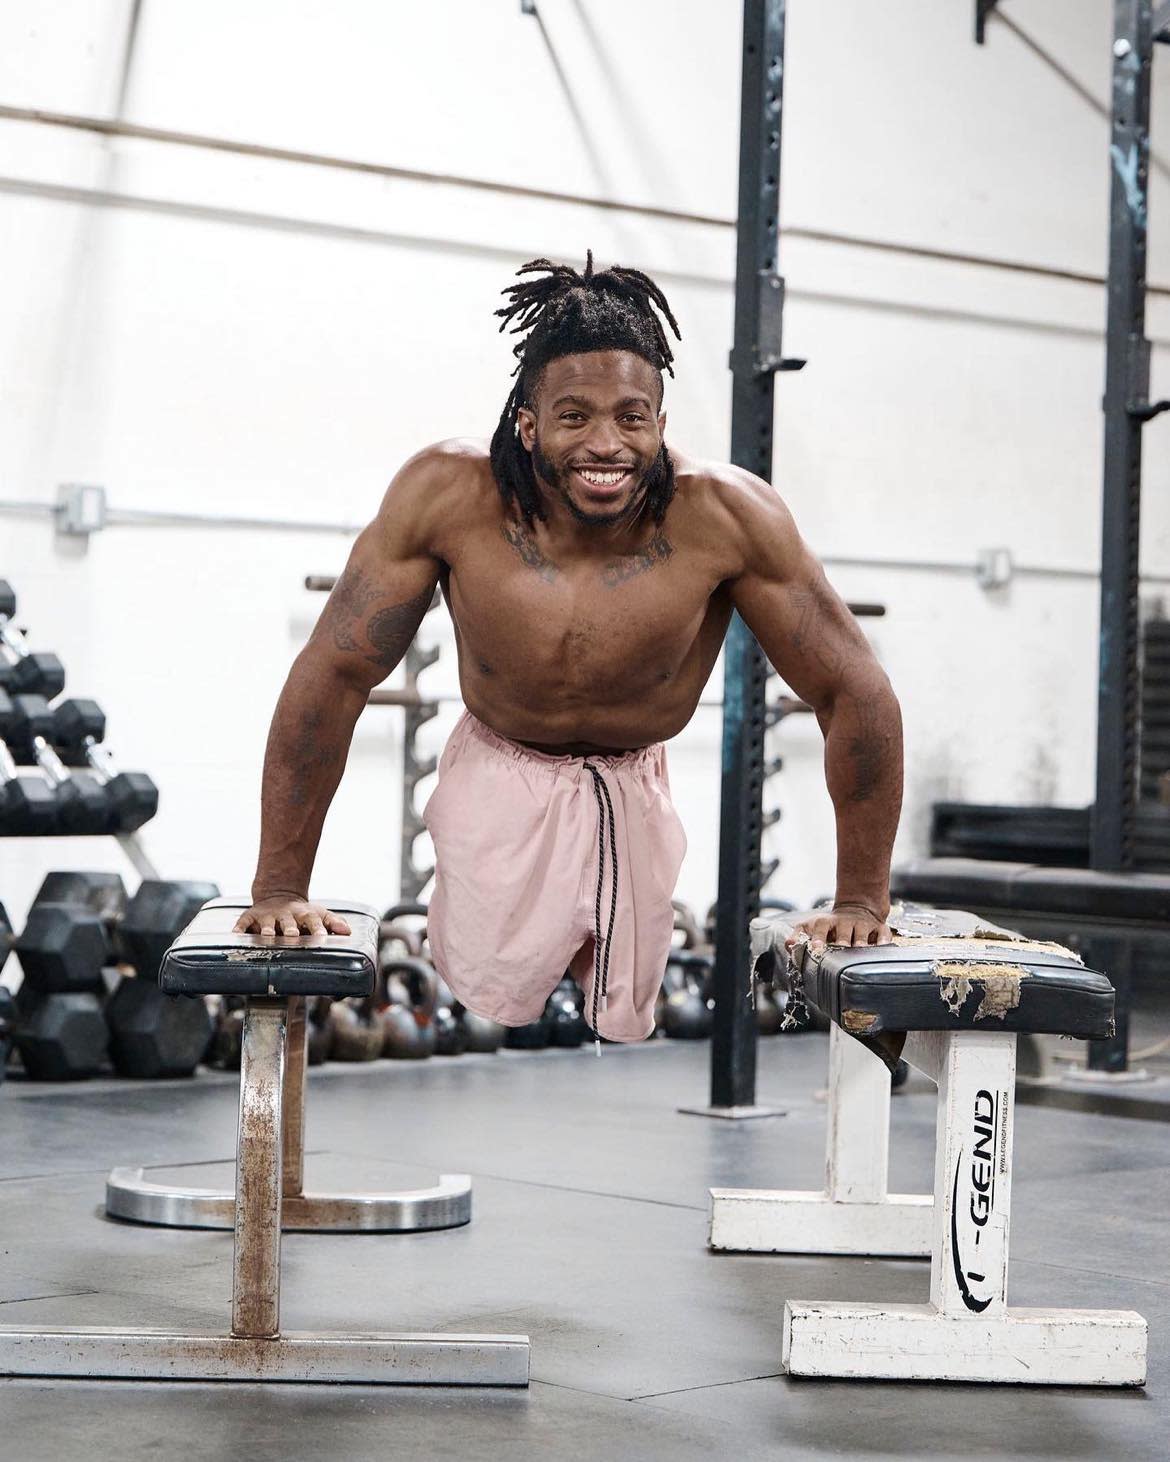 Former Massillon resident Zion Clark appeared on "America's Got Talent" on Tuesday night. Born without legs, Clark, an athlete and inspirational speaker, had also appeared on the television show earlier this summer.